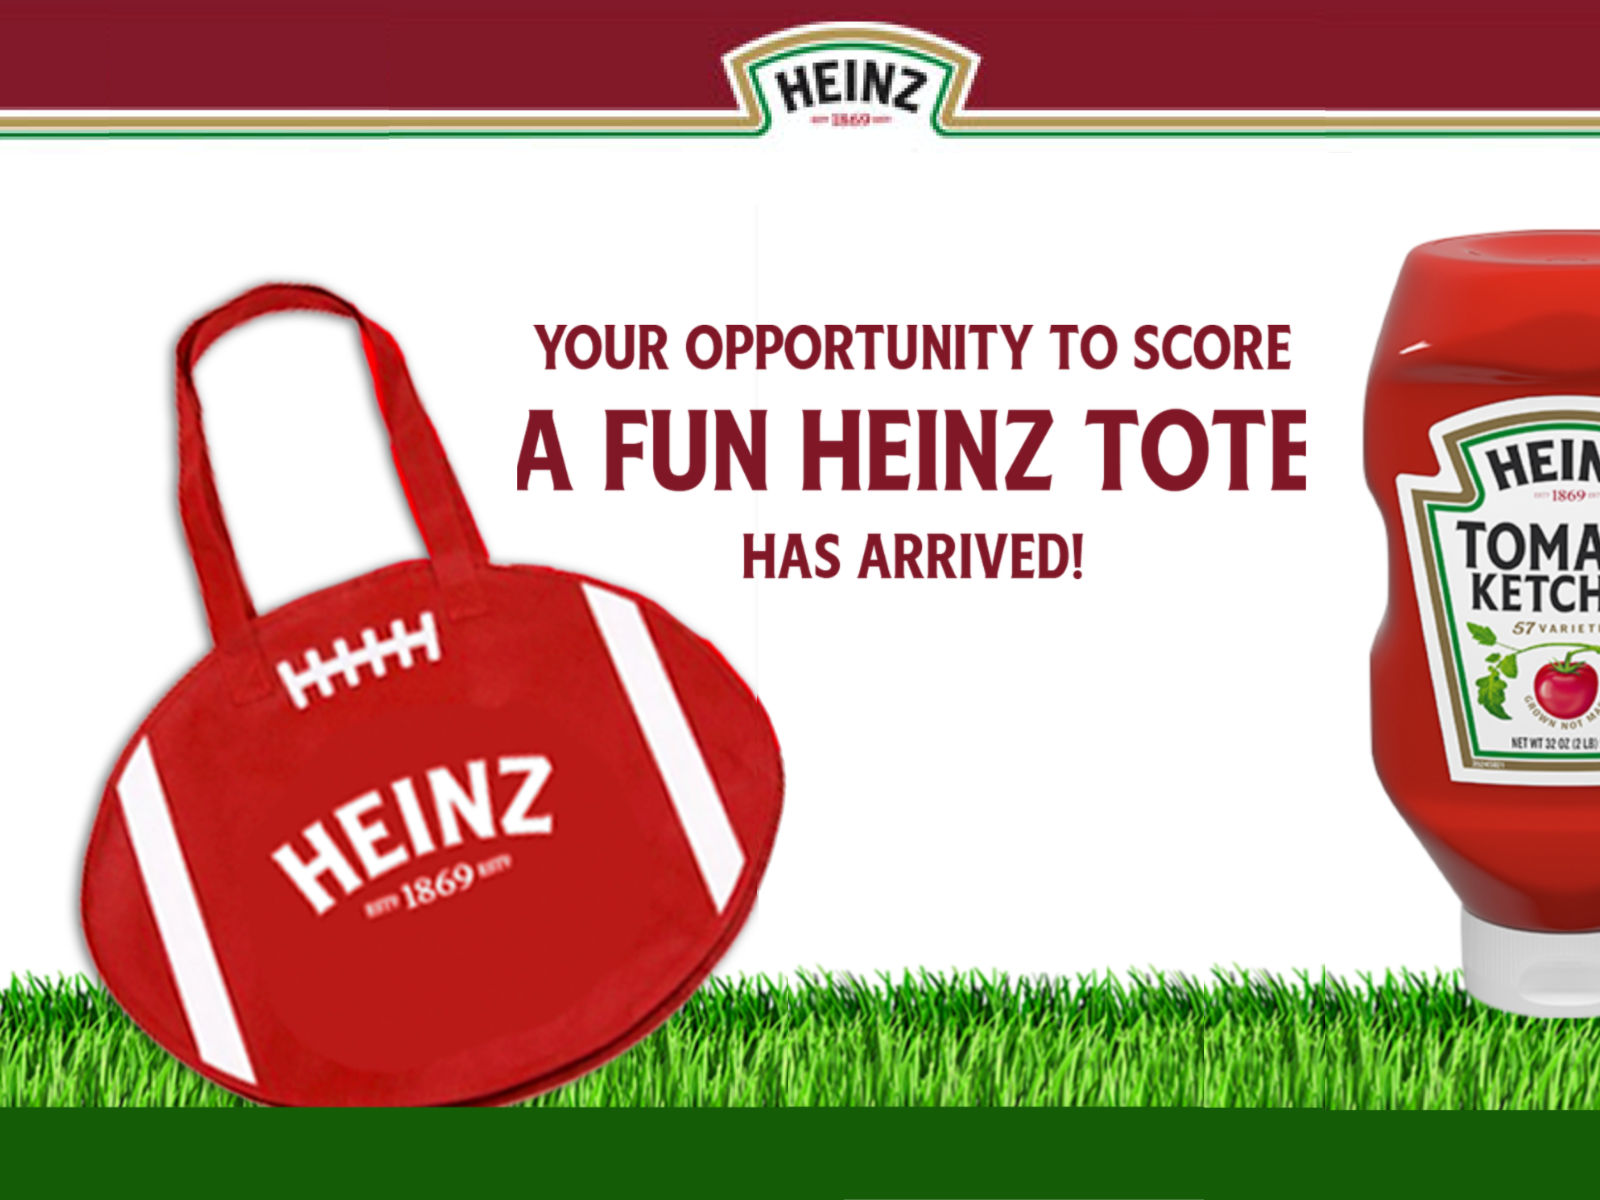 Score A Fun Heinz Tote With Purchase!